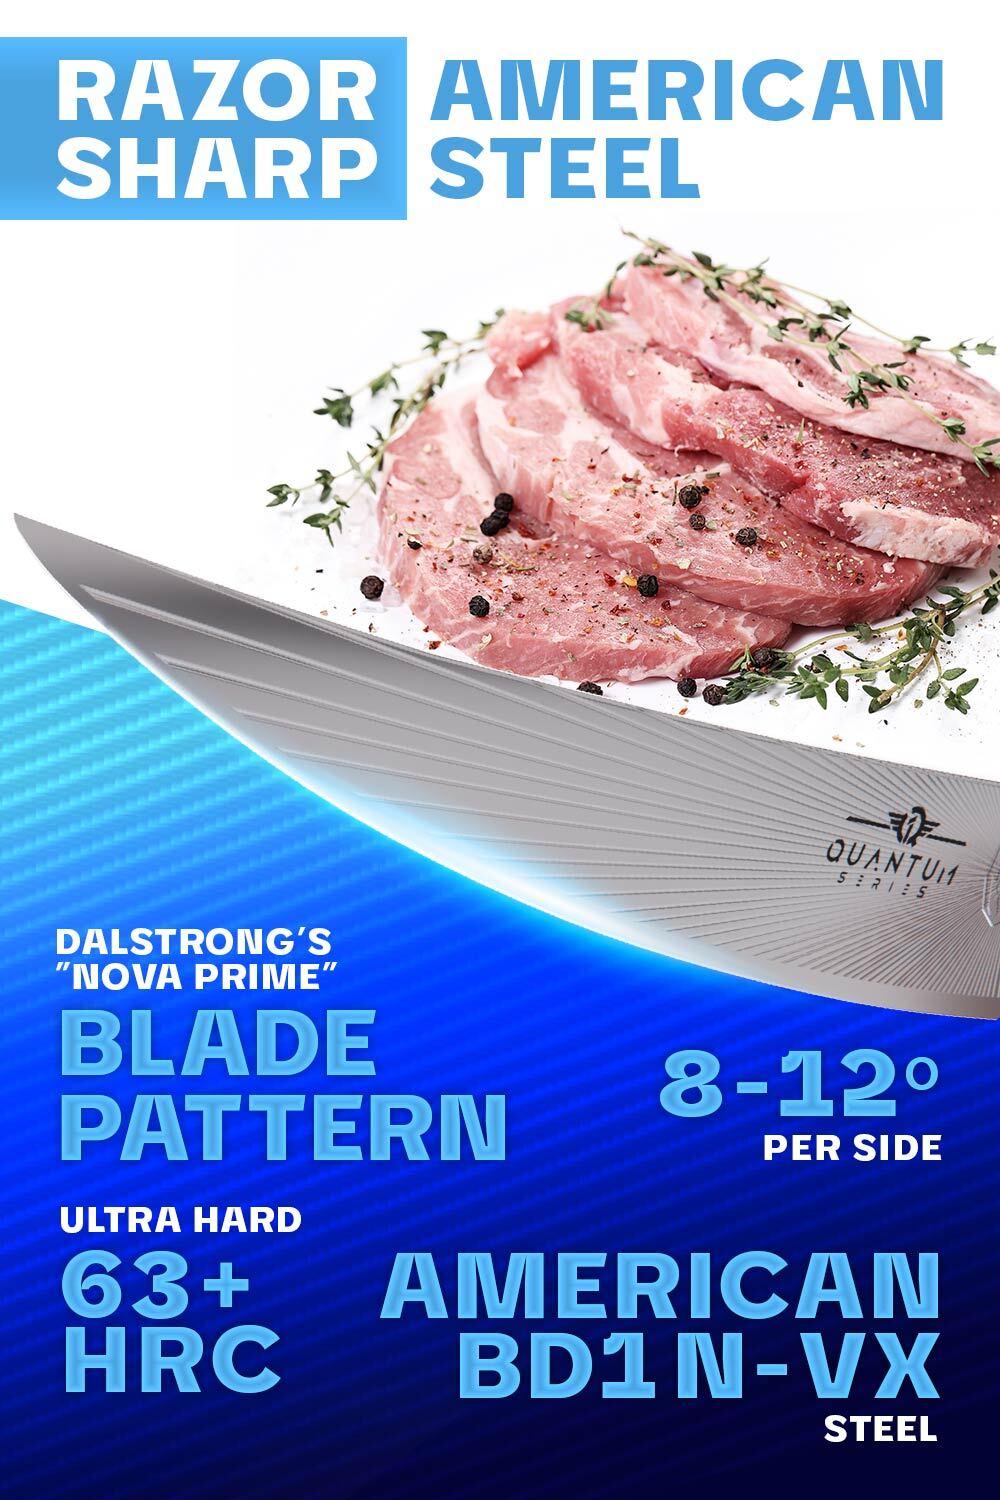 Dalstrong quantum 1 series 6 inch boning knife with dragon skin handle featuring it's razor sharp american steel blade.